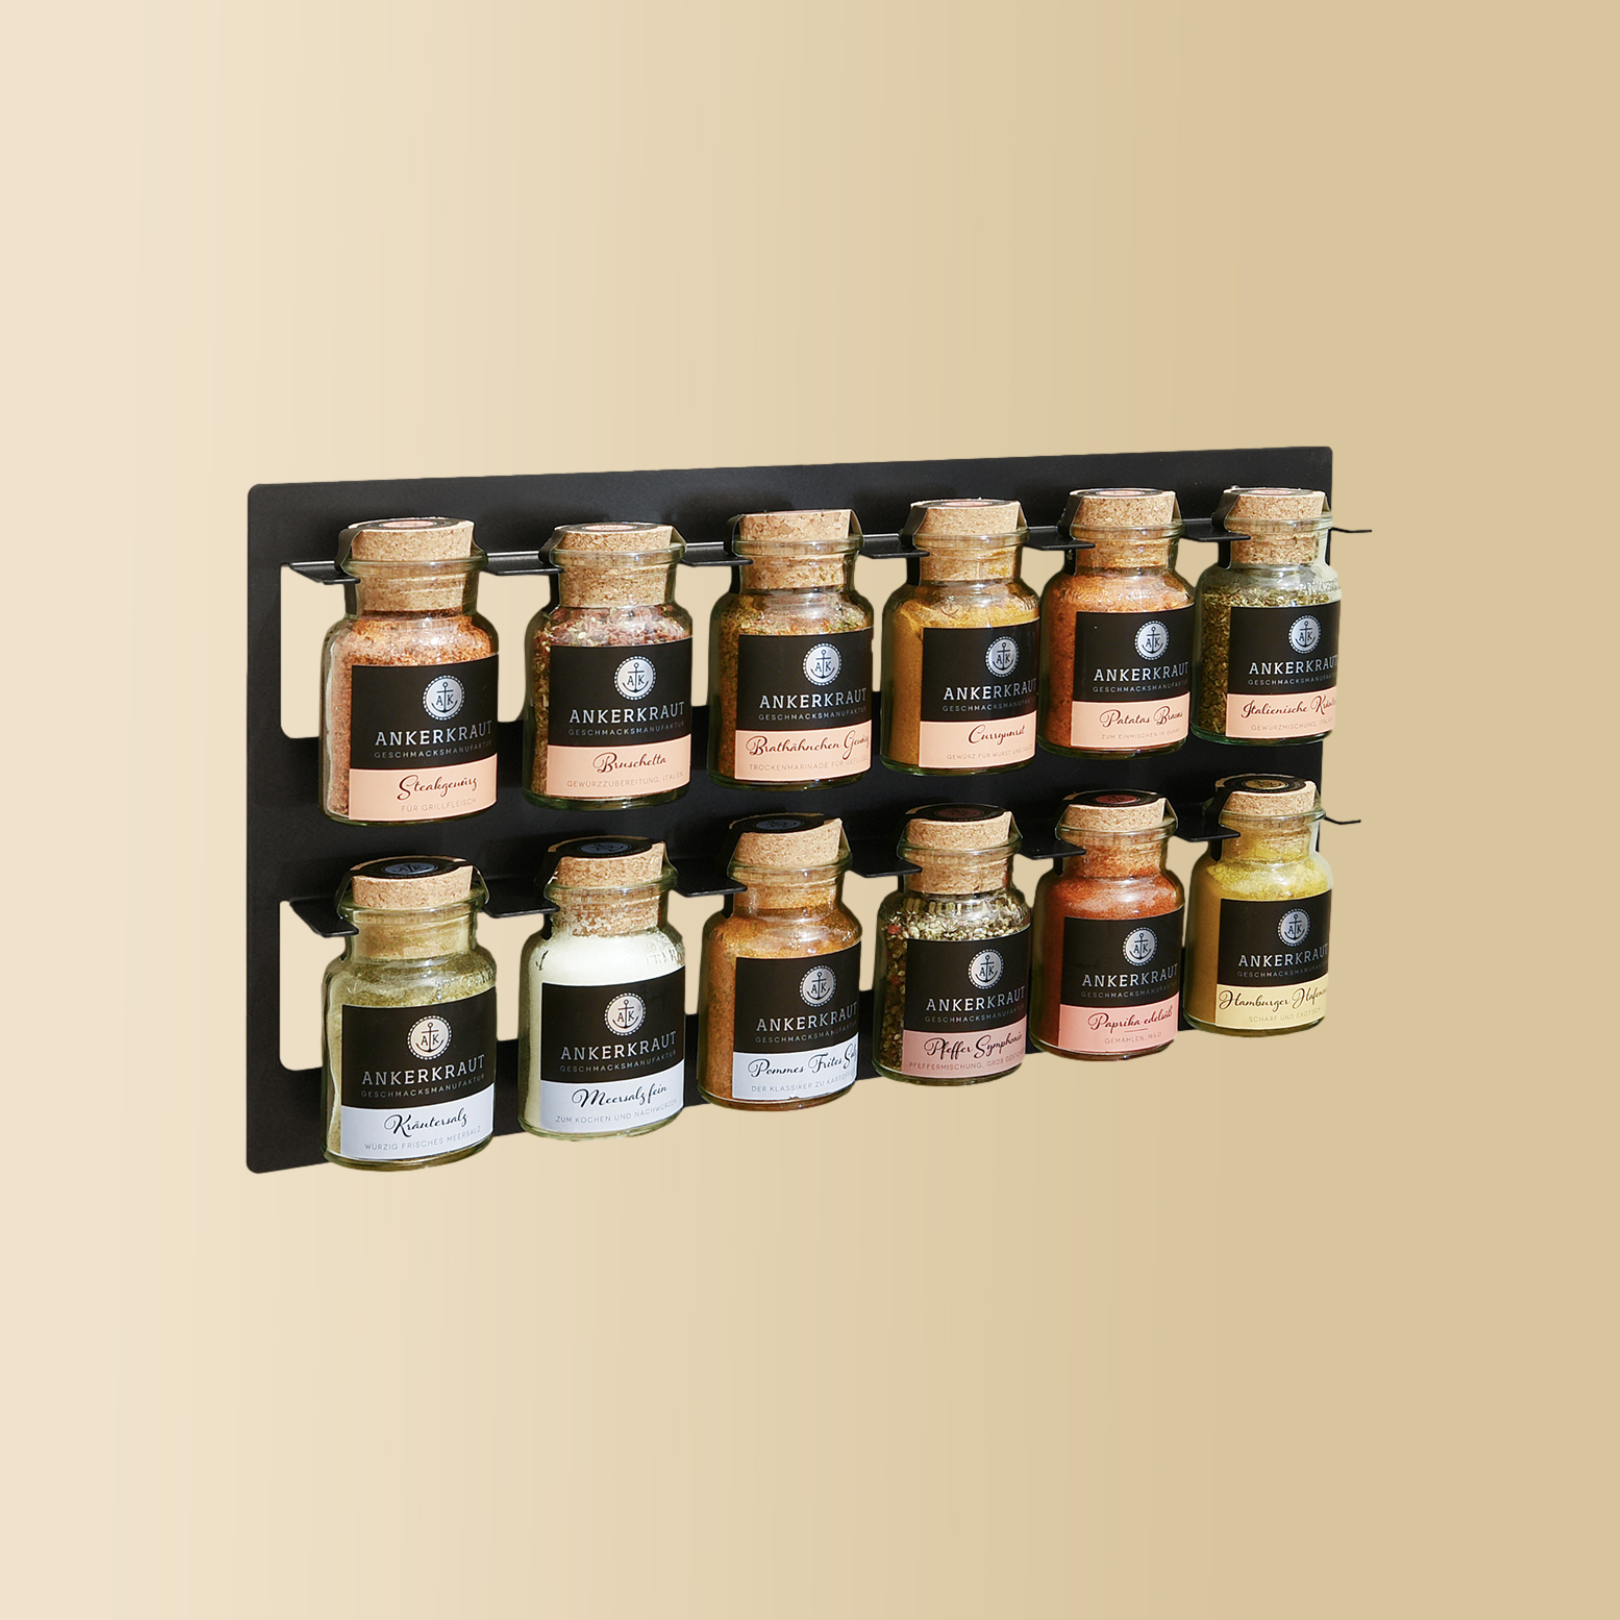 B-stock: Spice rack 12 compartments black - for Ankerkraut® spices